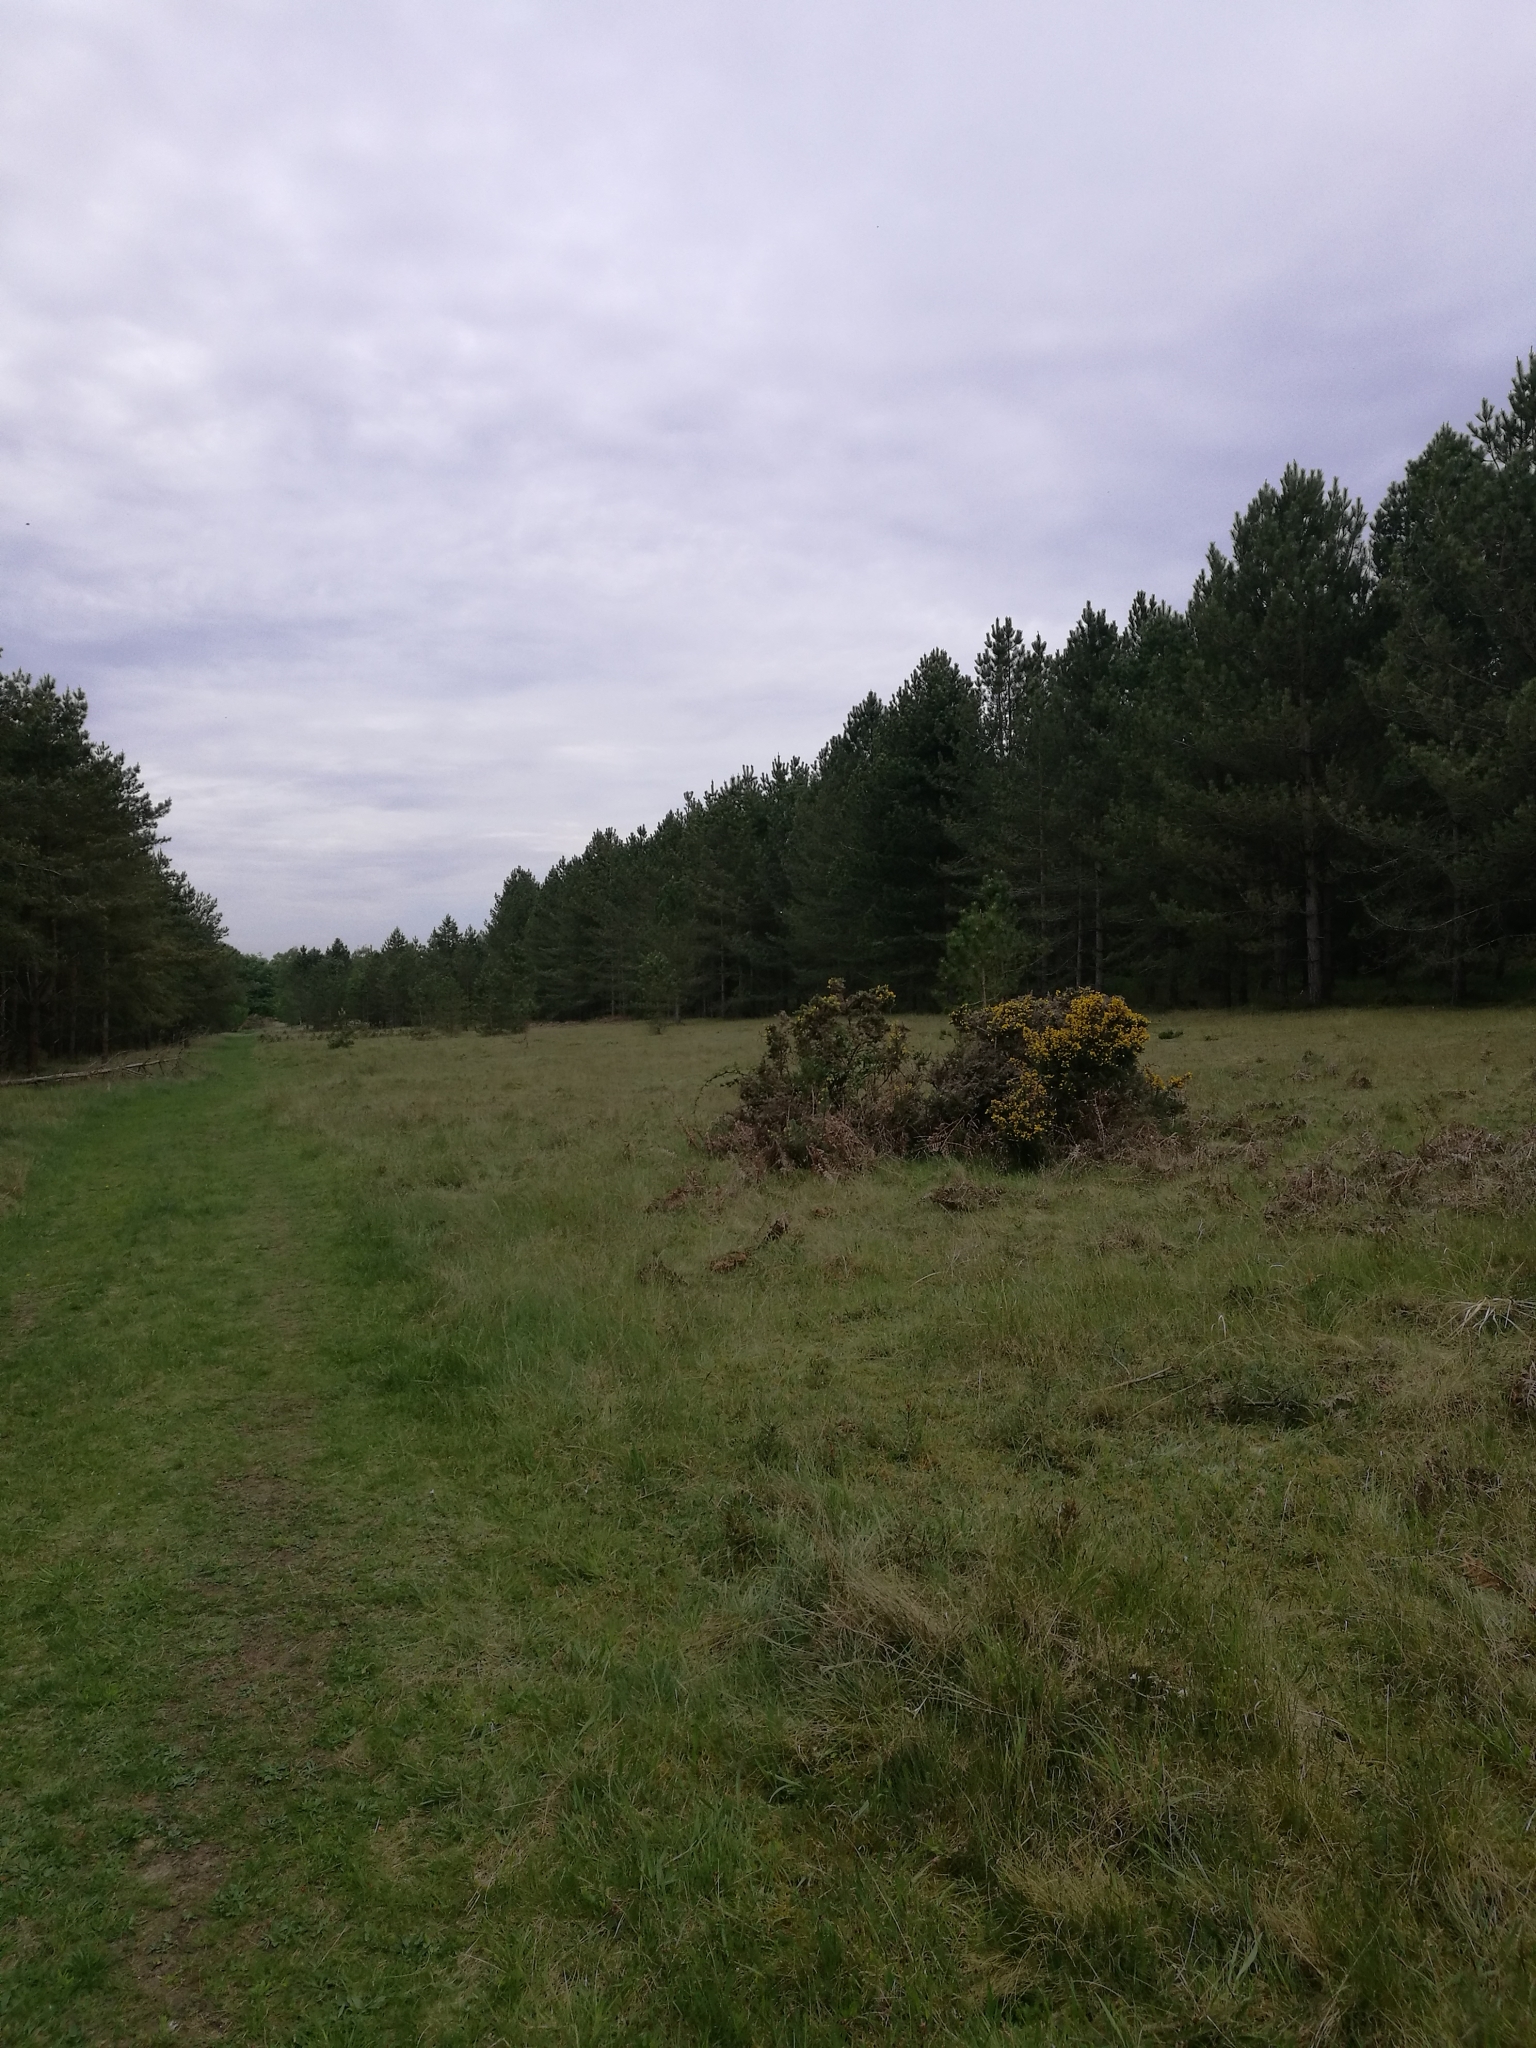 A photo from the FoTF Conservation Event - May 2022 - Self Sown Fir Removal at Kings Forest : A shot of the work area showing the work undertaken by the volunteers